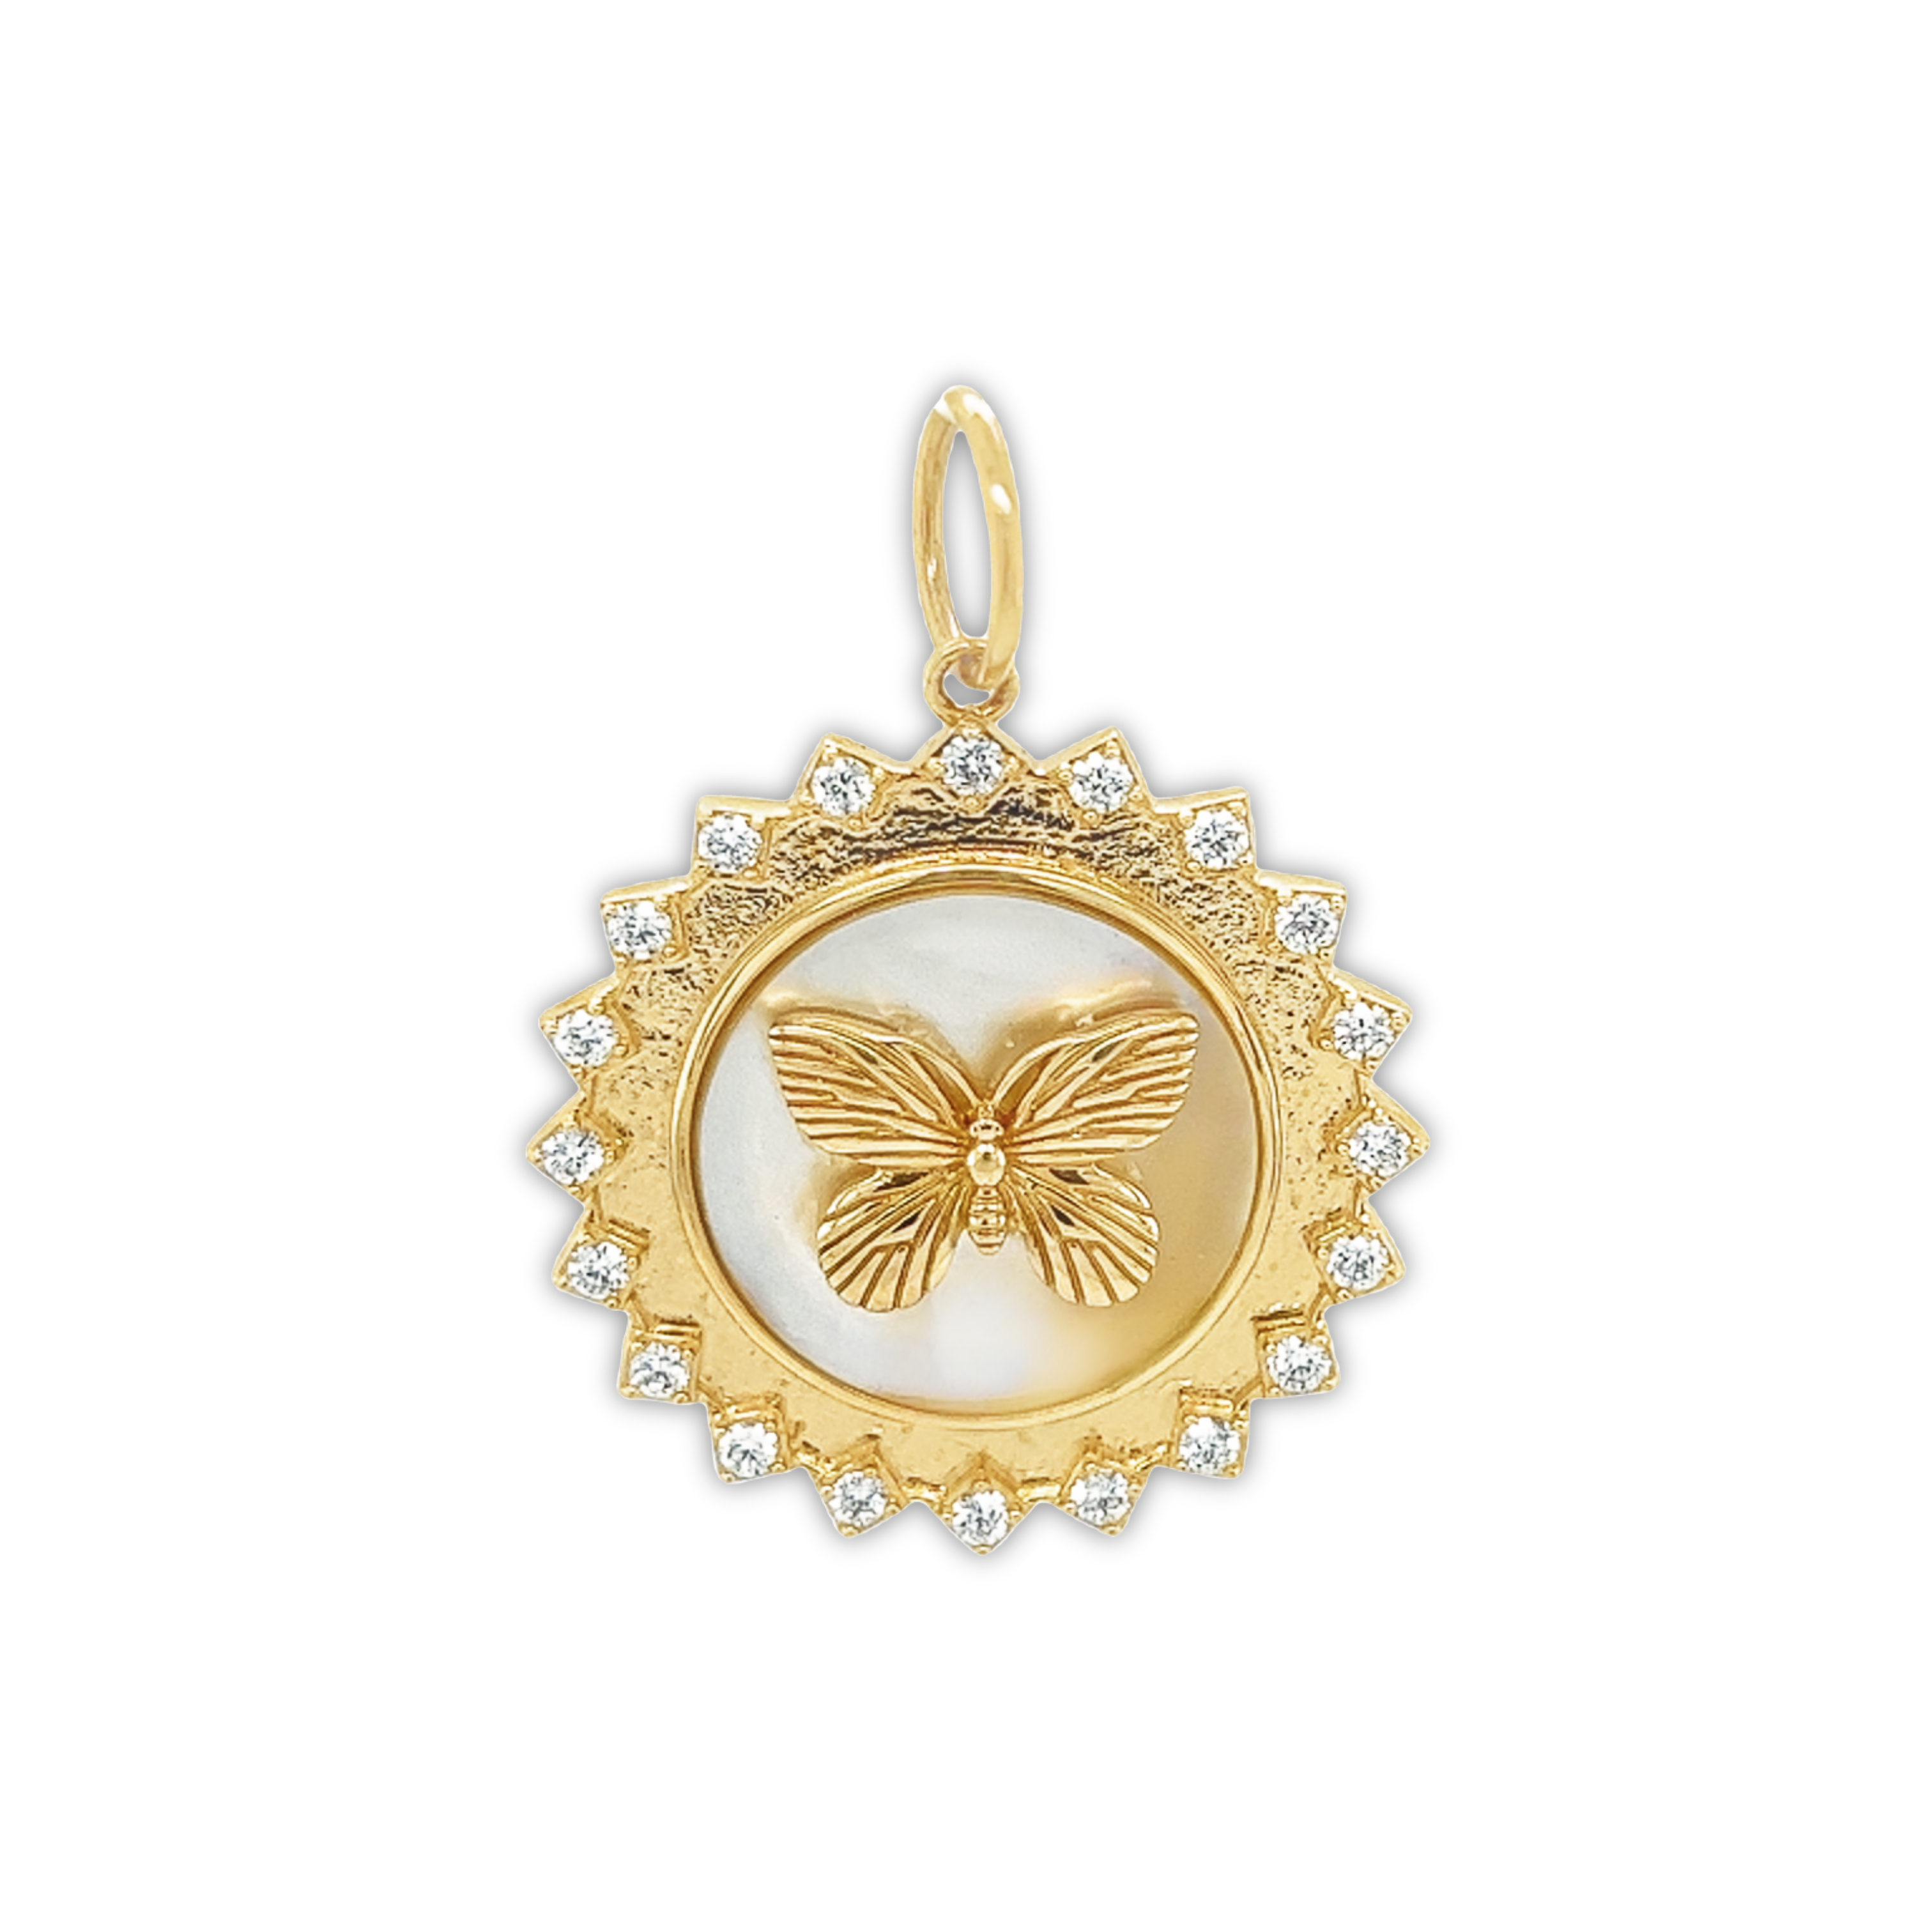 Featured image for “Diamond Embellished Mother of Pearl Butterfly Pendant”